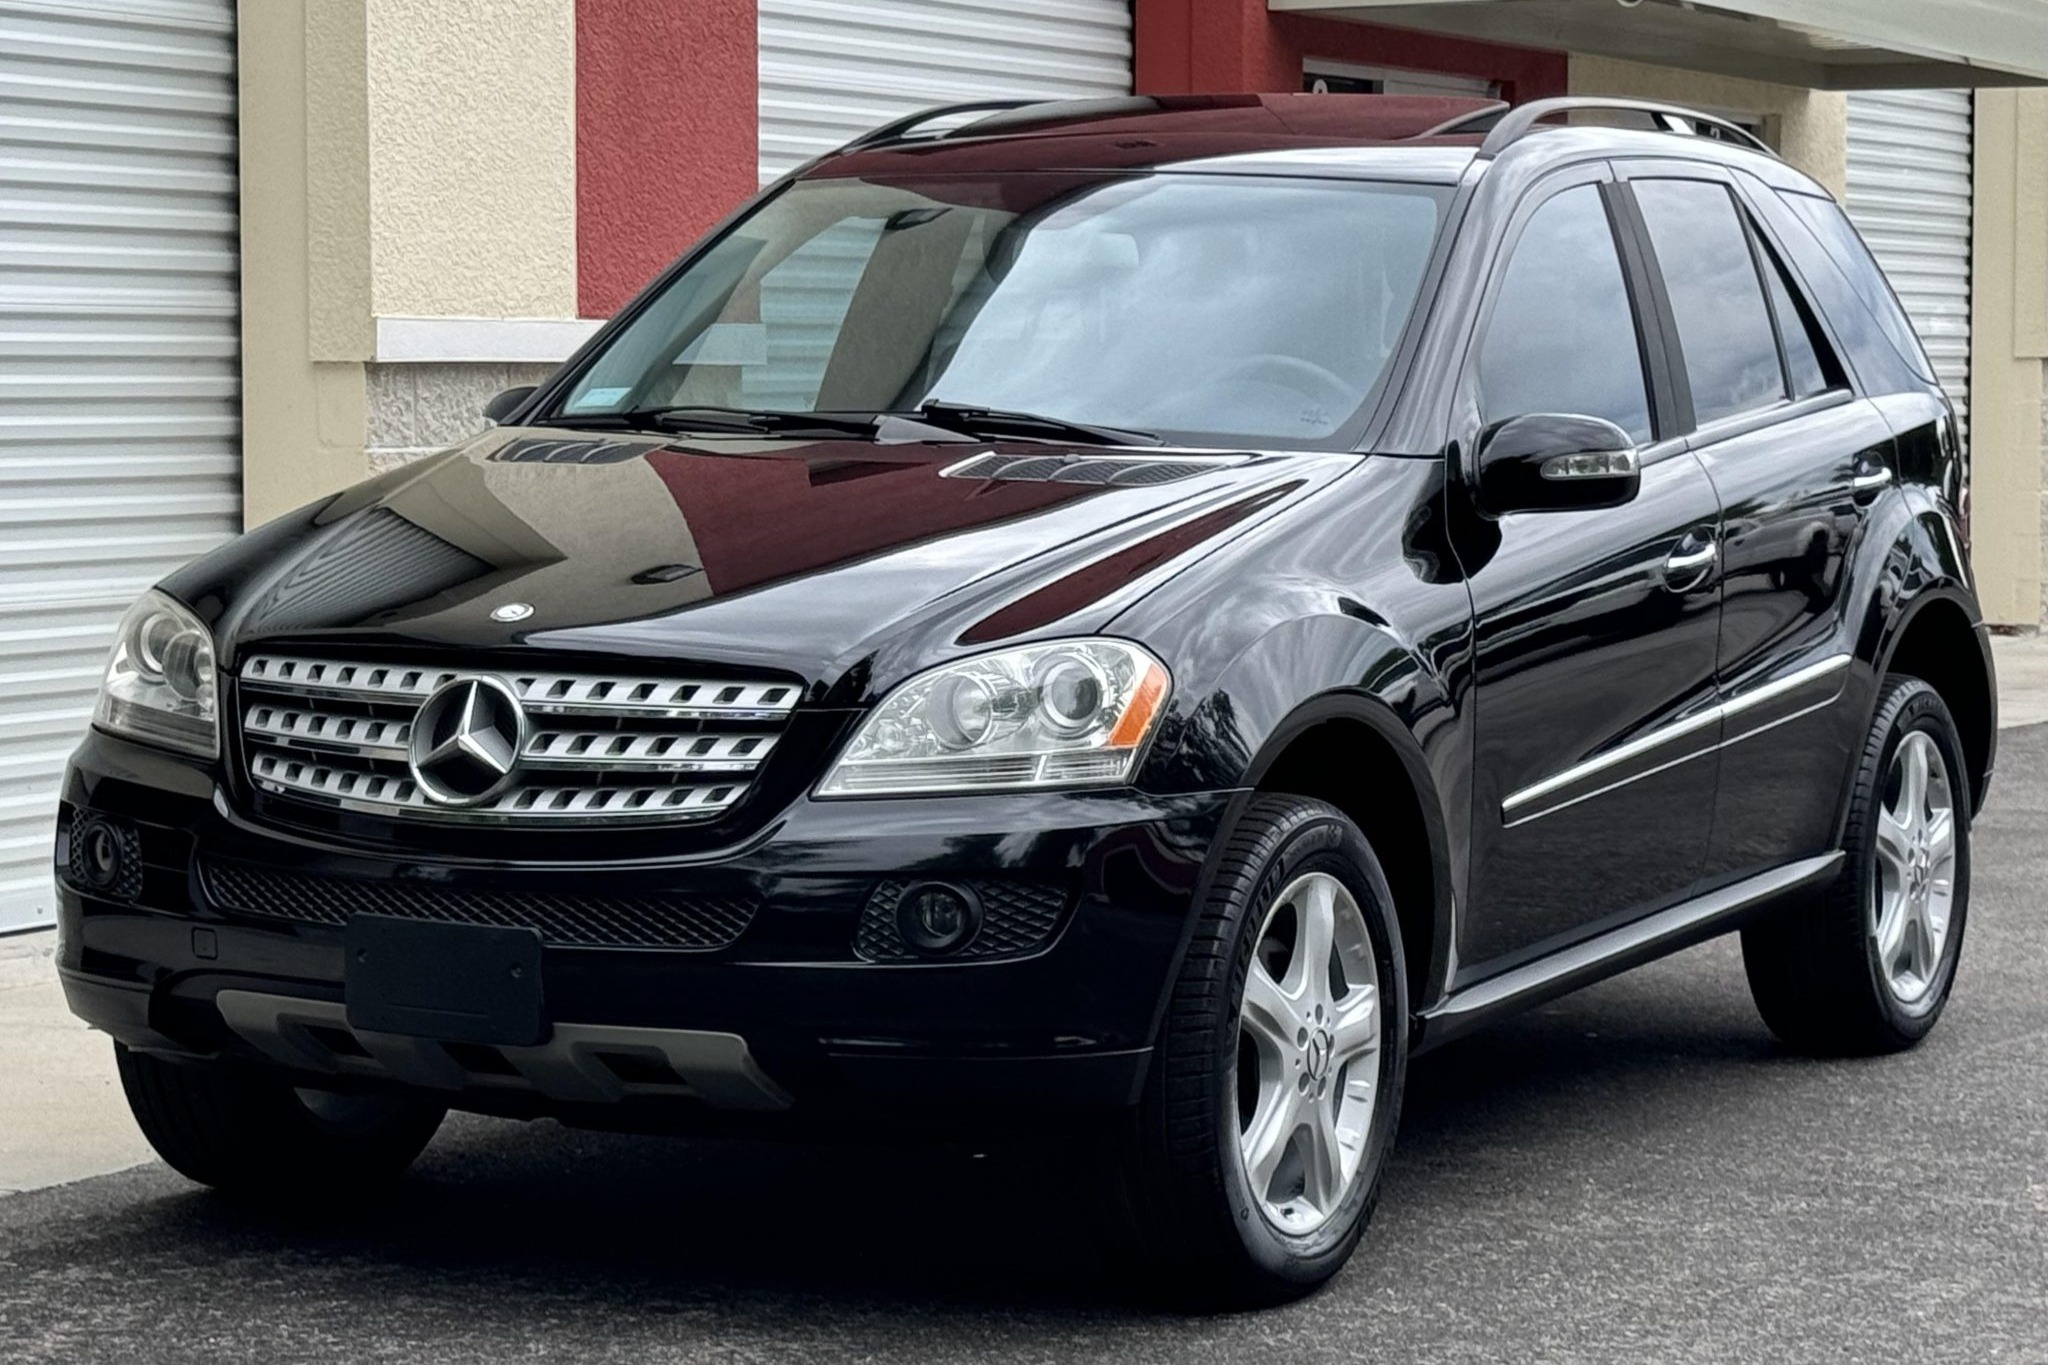 Used 2008 Mercedes-Benz ML350 4MATIC Review